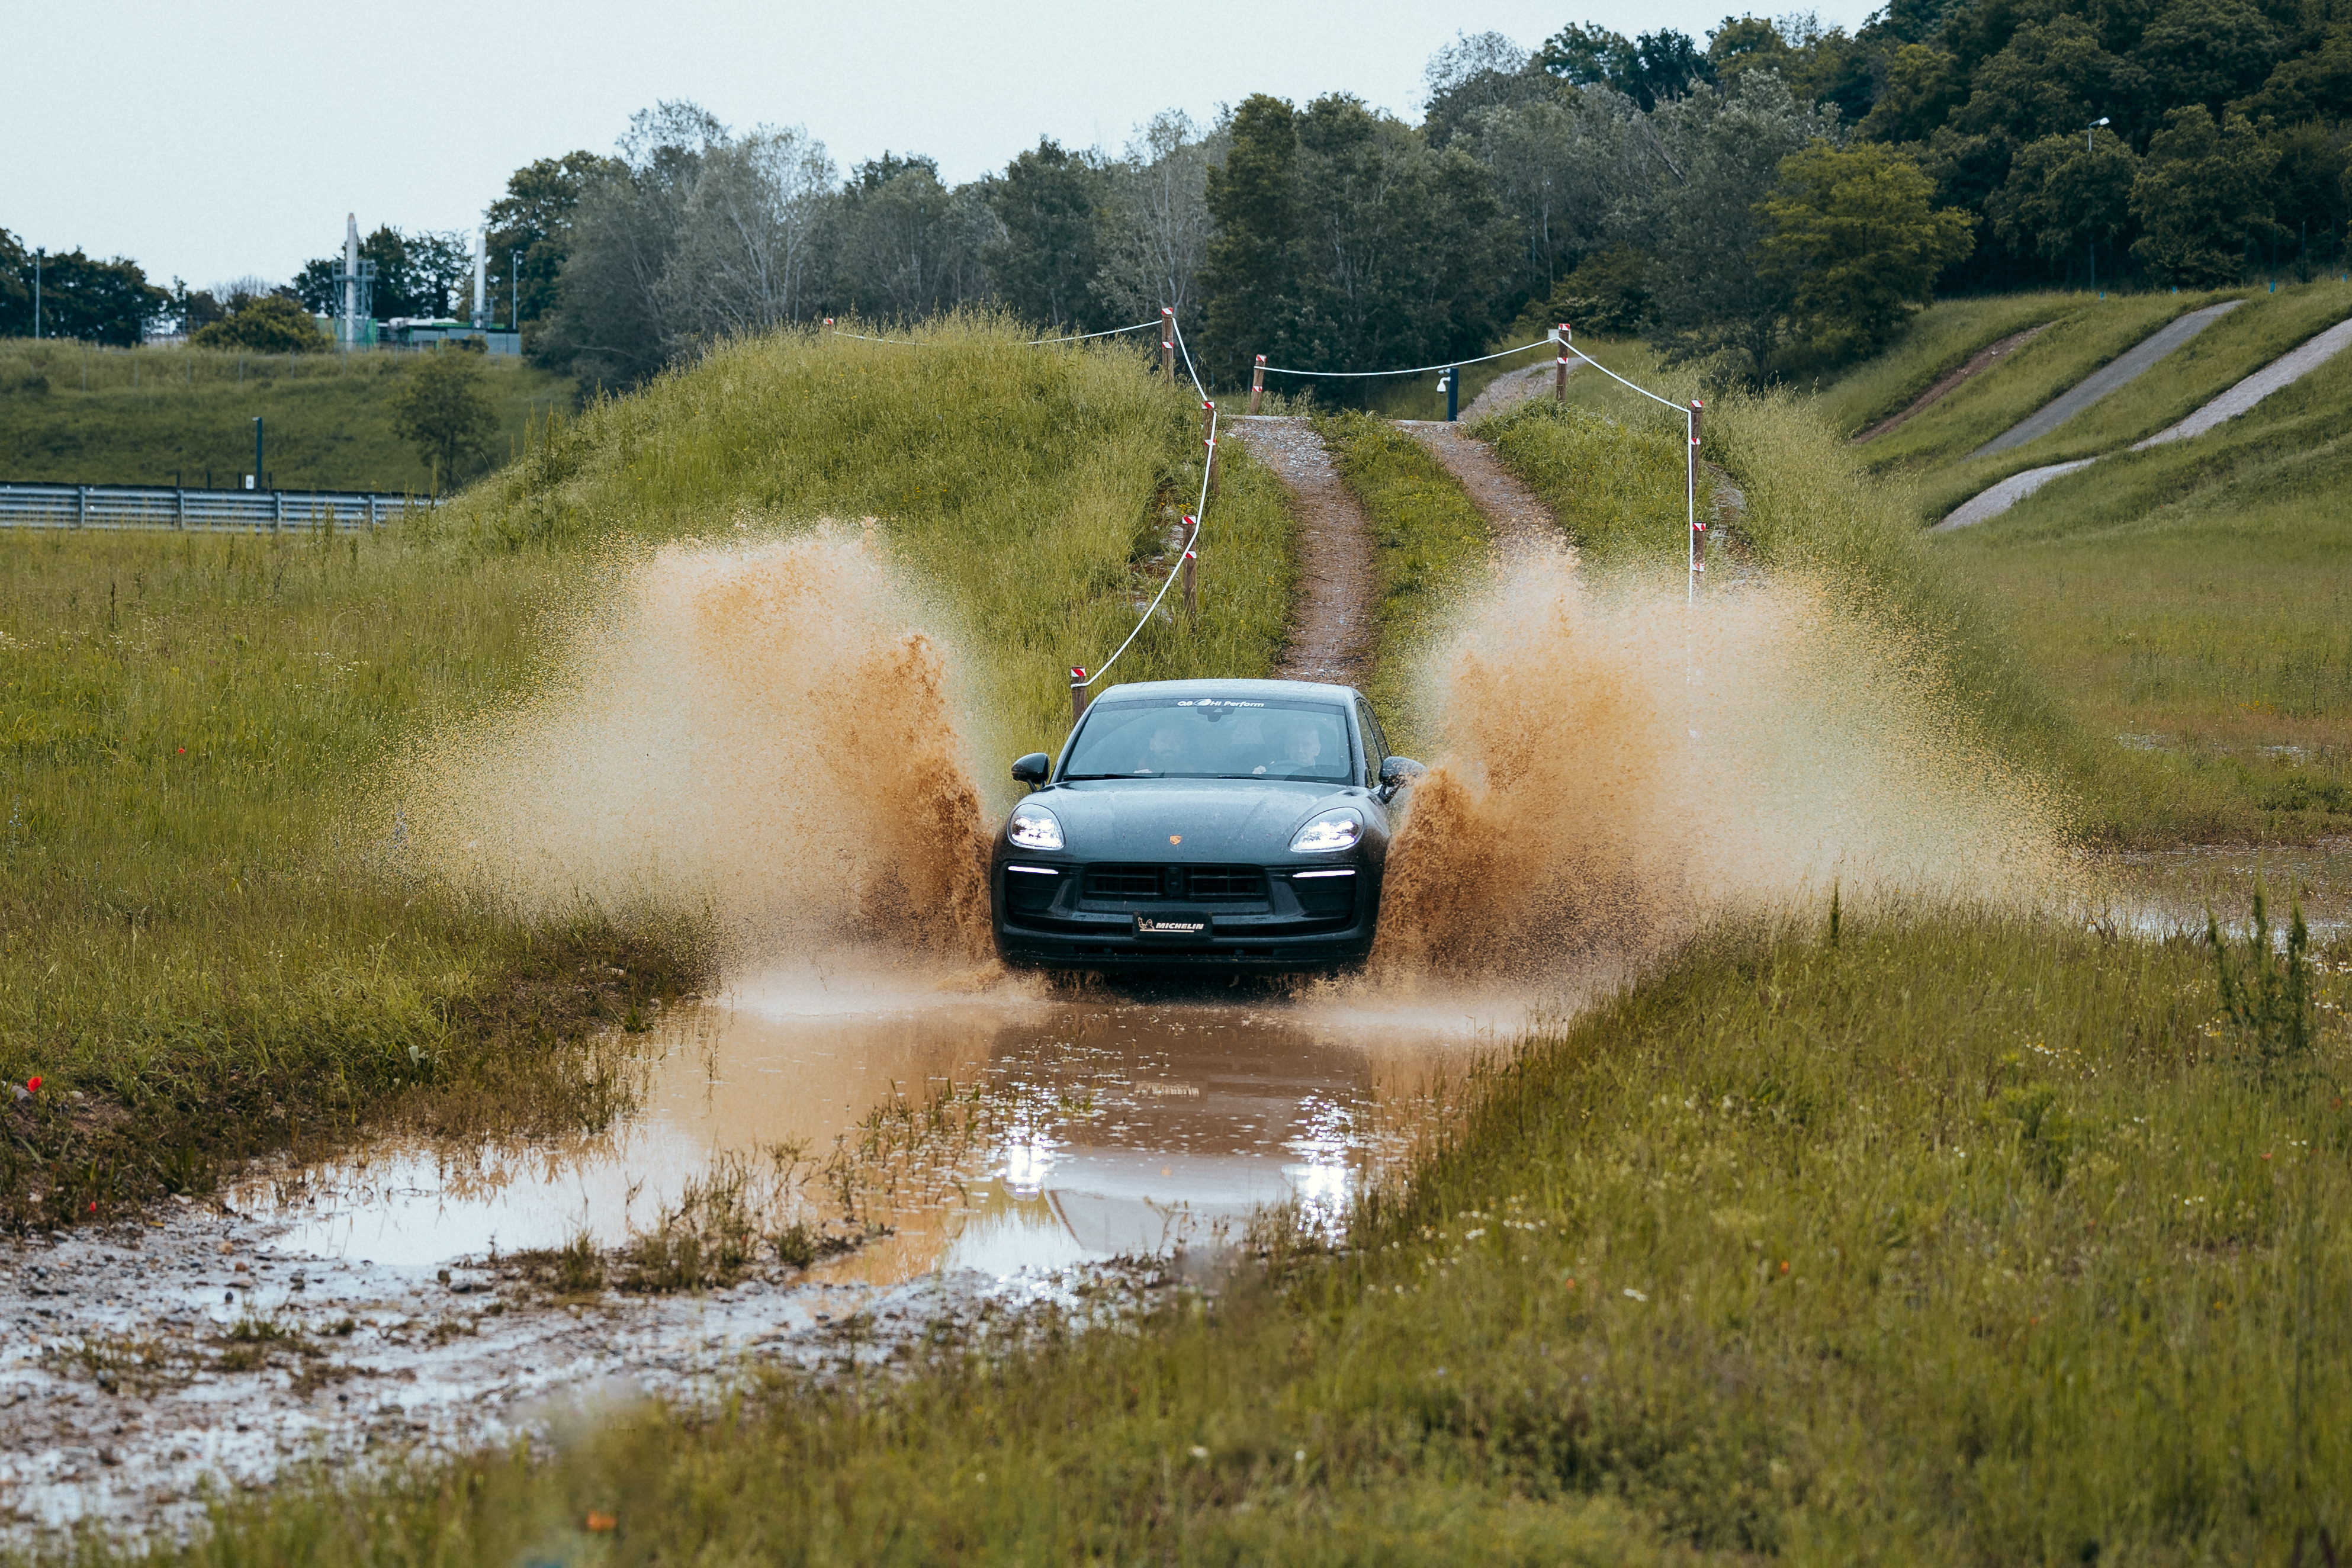 Porsche Cayenne drives down a muddy road into a puddle